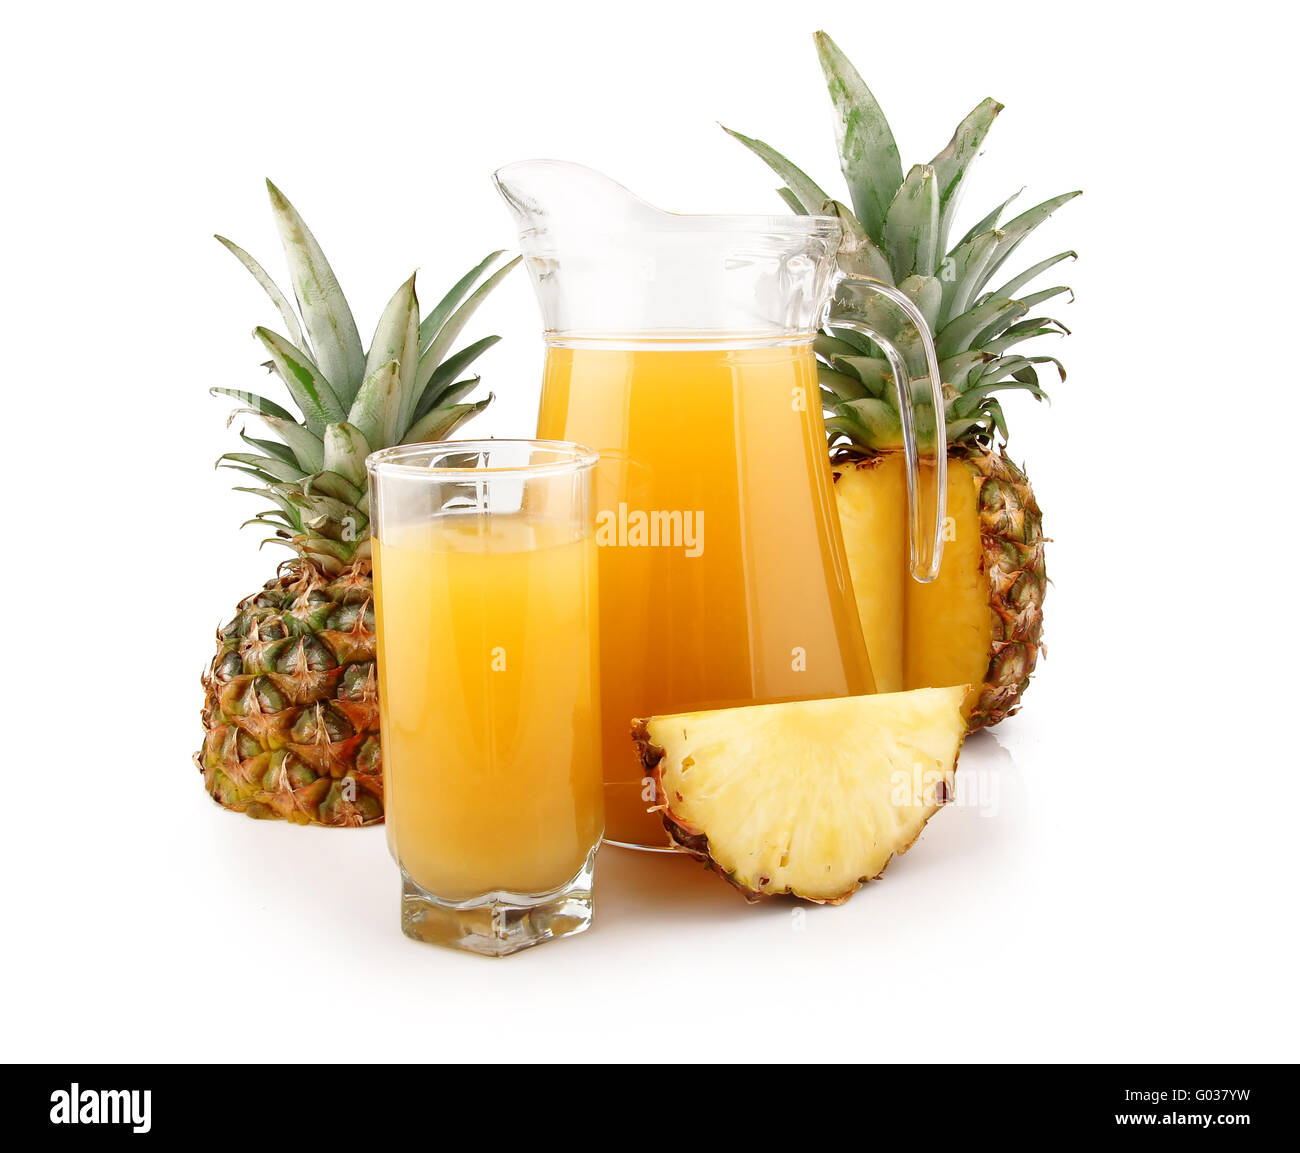 https://c8.alamy.com/comp/G037YW/jug-and-glass-of-pineapple-juice-with-fruits-isolated-G037YW.jpg